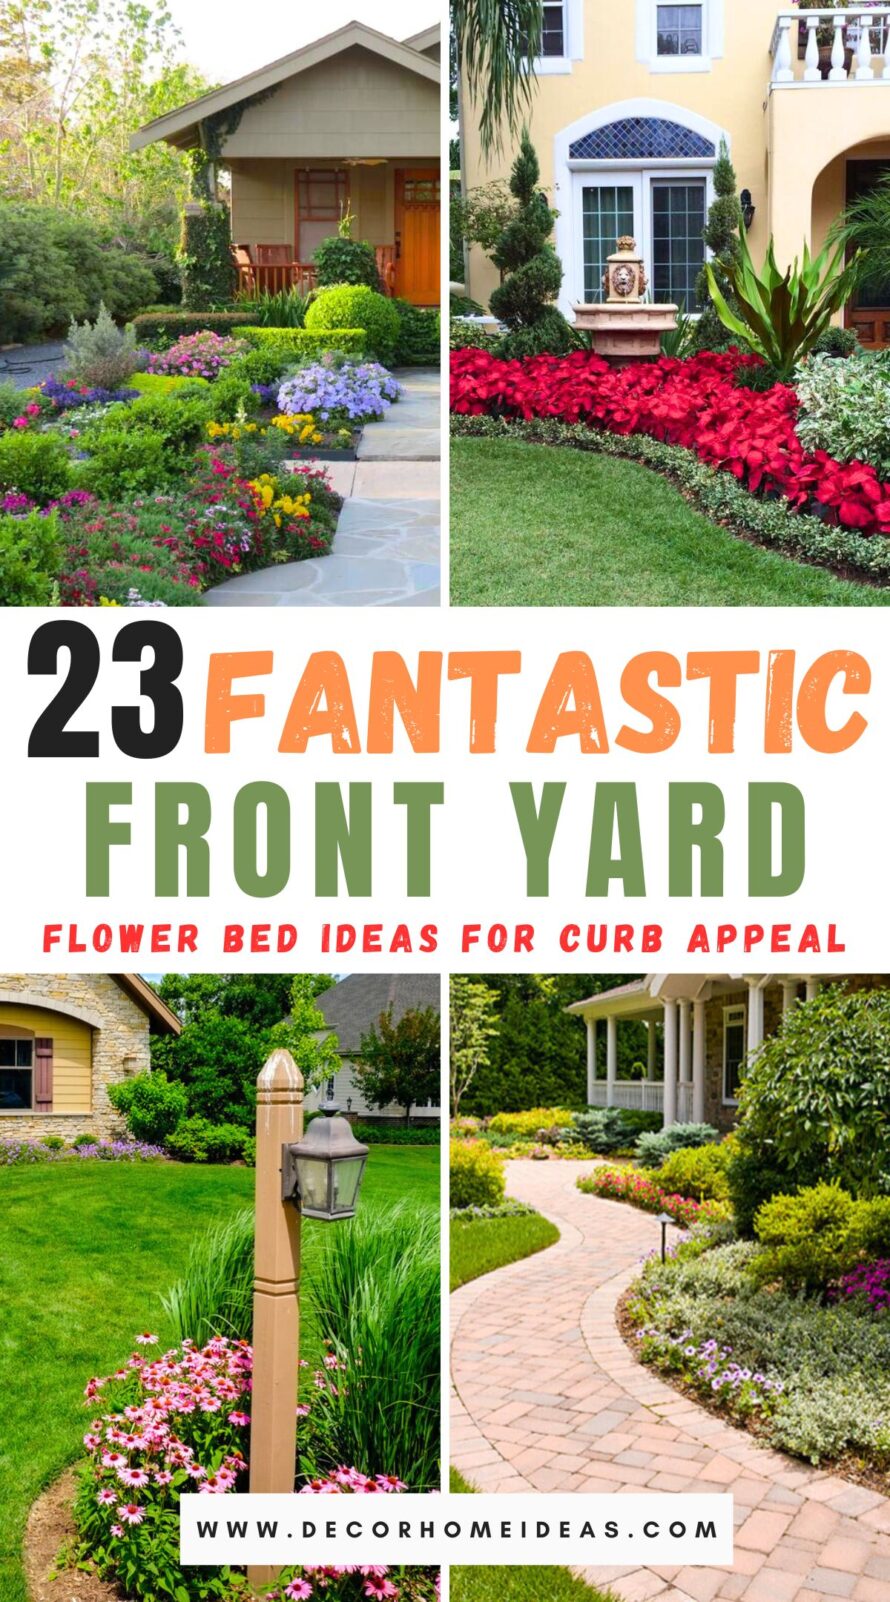 Transform your front yard with 23 stunning flower bed ideas designed to enhance curb appeal. From colorful blooms to lush greenery, these landscaping inspirations will elevate the beauty of your outdoor space.